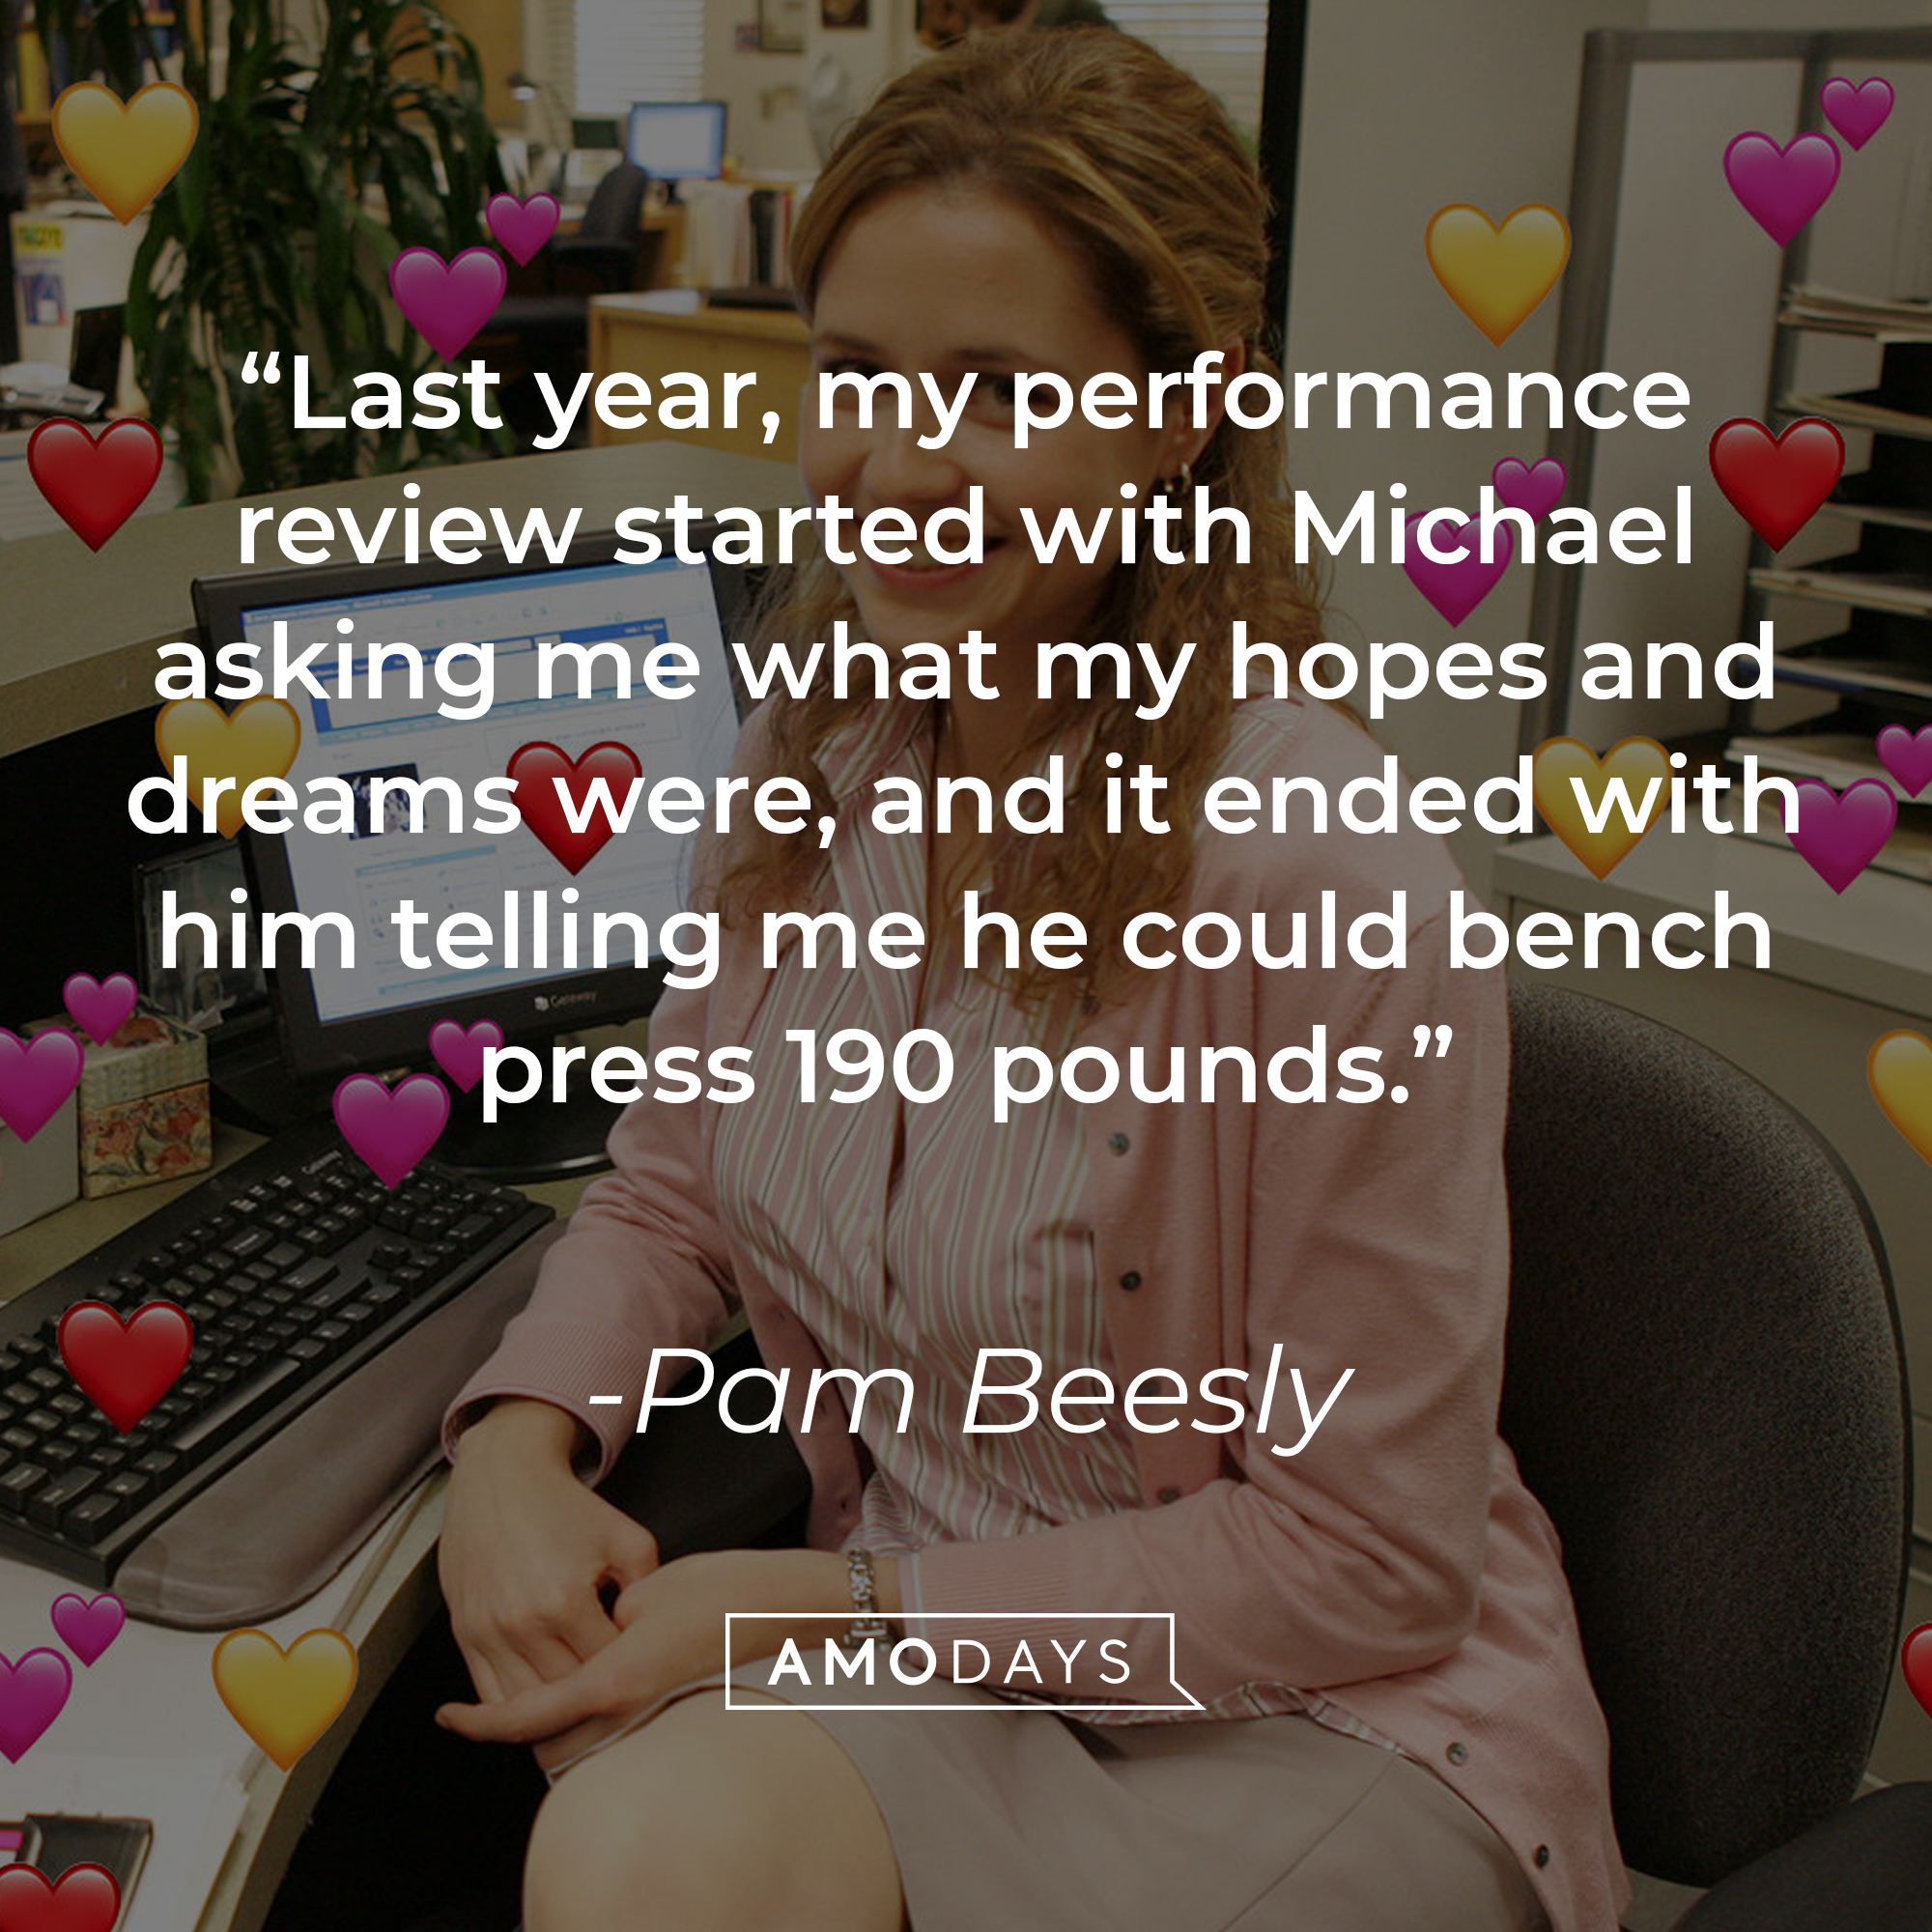 Pam Beesly's quote, "Last year, my performance review started with Michael asking me what my hopes and dreams were, and it ended with him telling me he could bench press 190 pounds." | Source: Facebook/TheOfficeTV